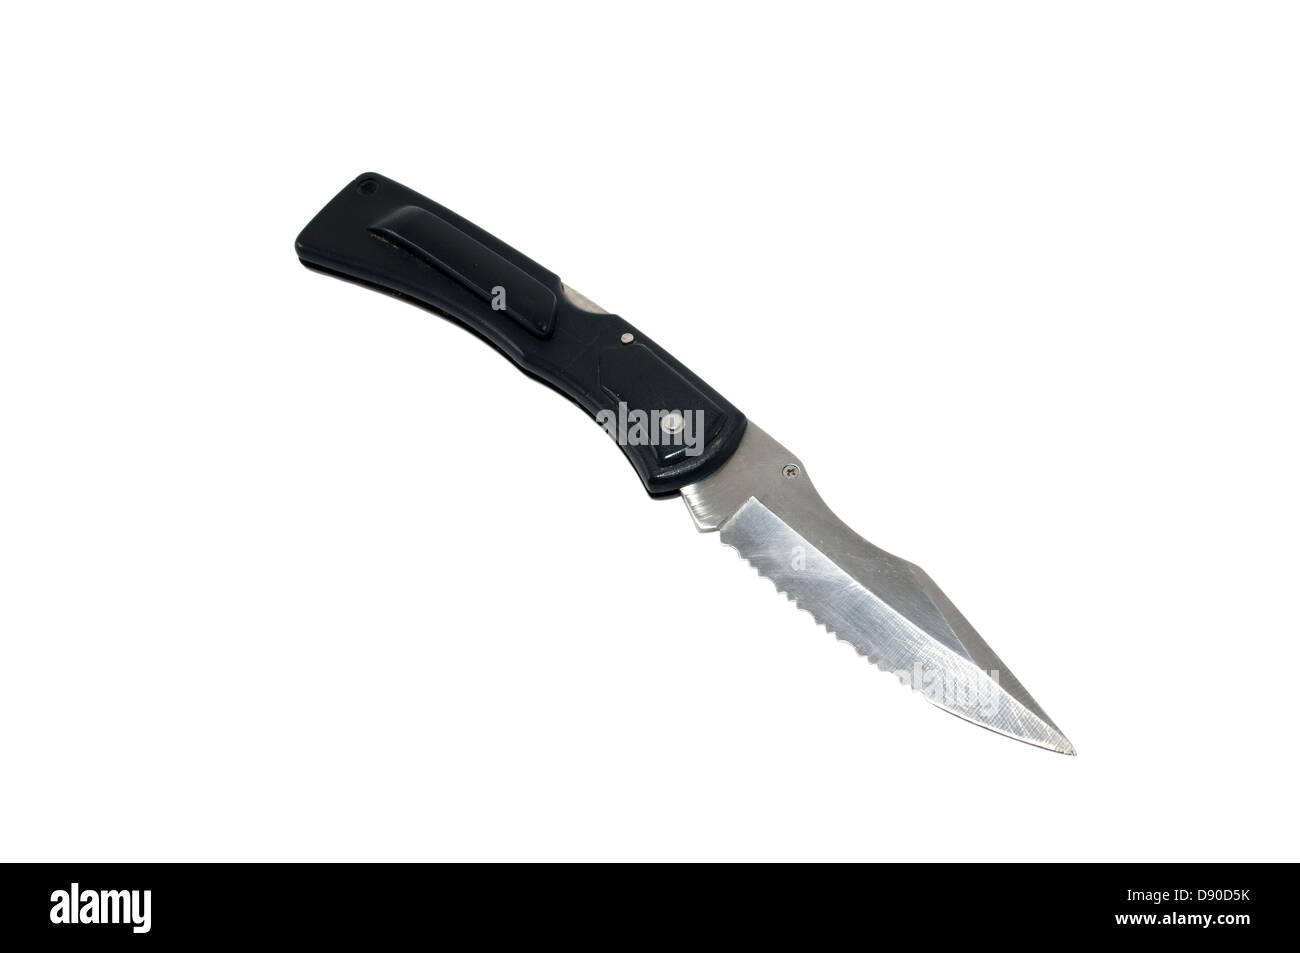 https://c8.alamy.com/comp/D90D5K/hunting-or-fishing-folding-knife-with-a-black-handle-isolated-on-white-D90D5K.jpg